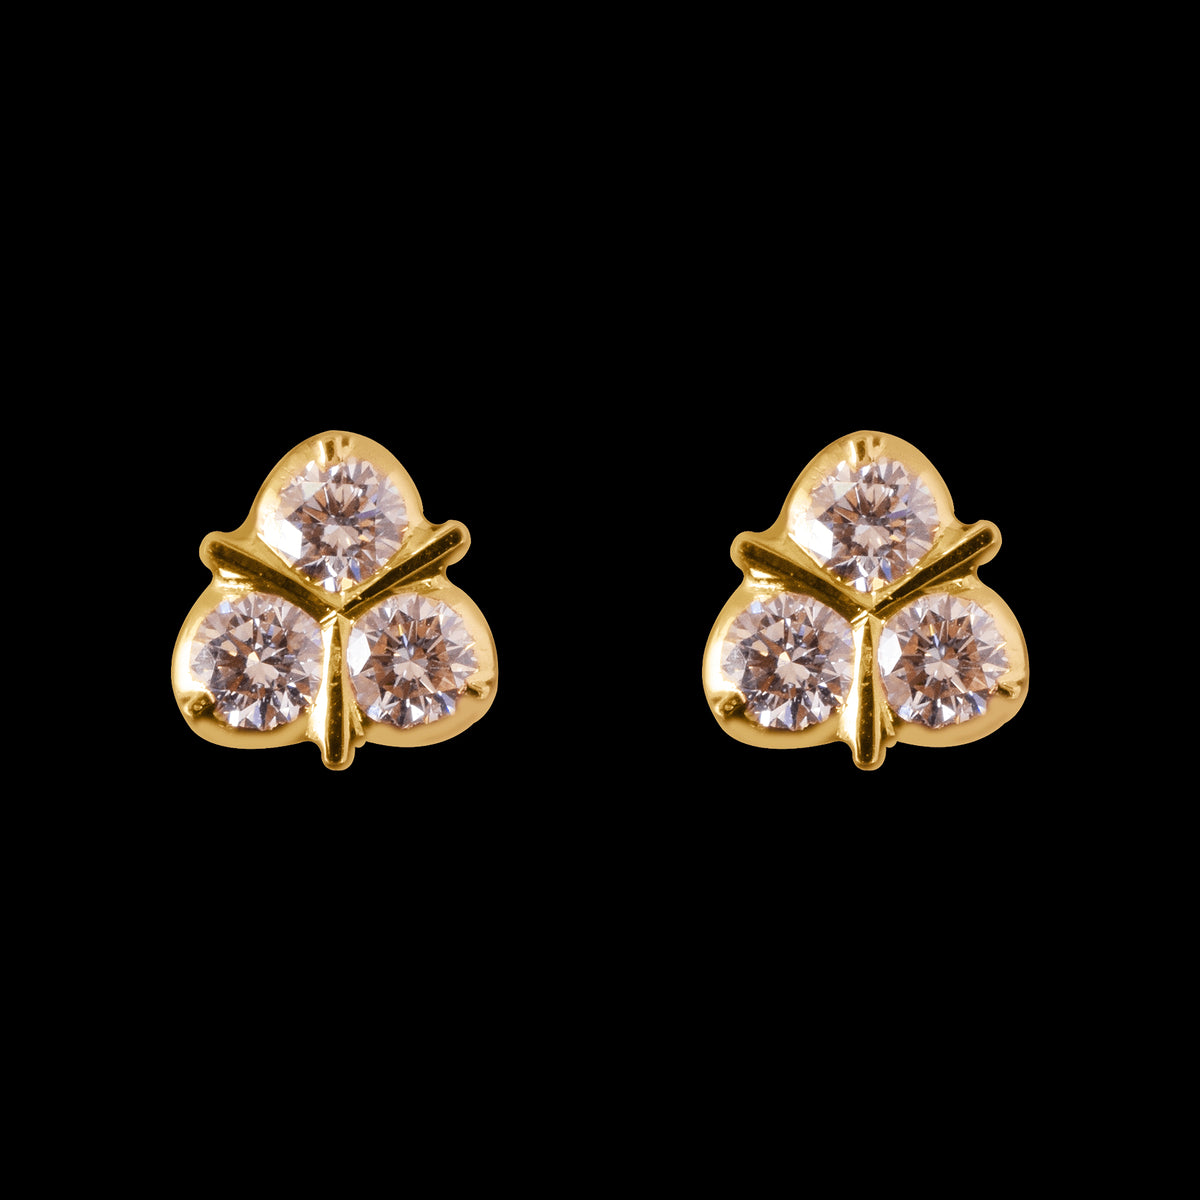 Contemporary Solitaire Look Gold and Diamond Stud Earrings